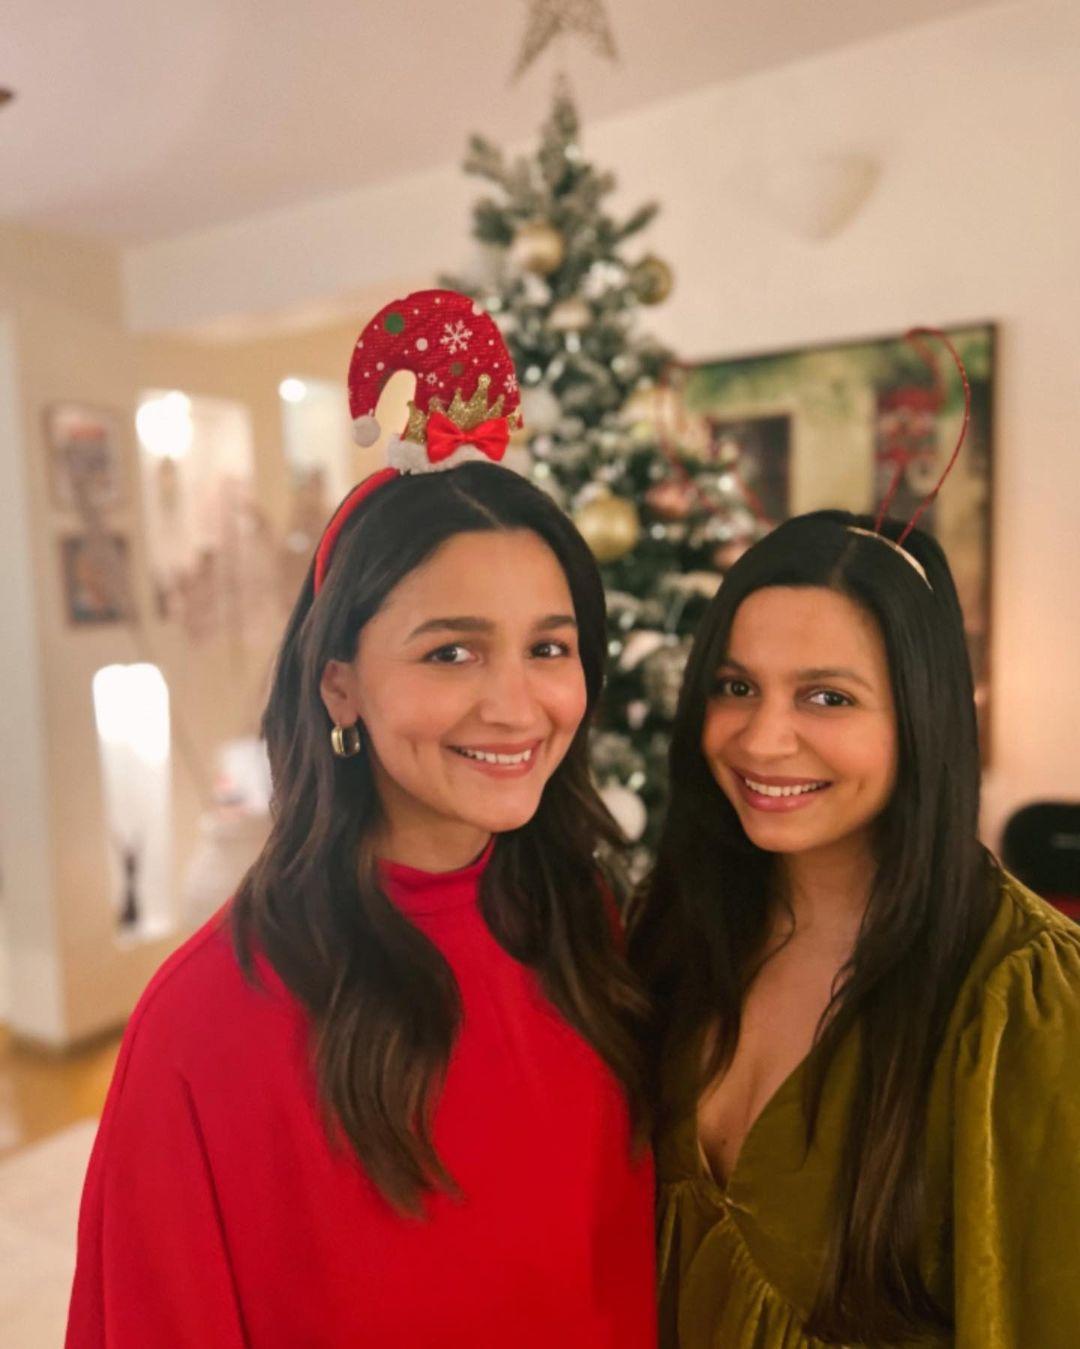 Alia also dropped a picture with sister Shaheen with a Christmas tree in the backdrop